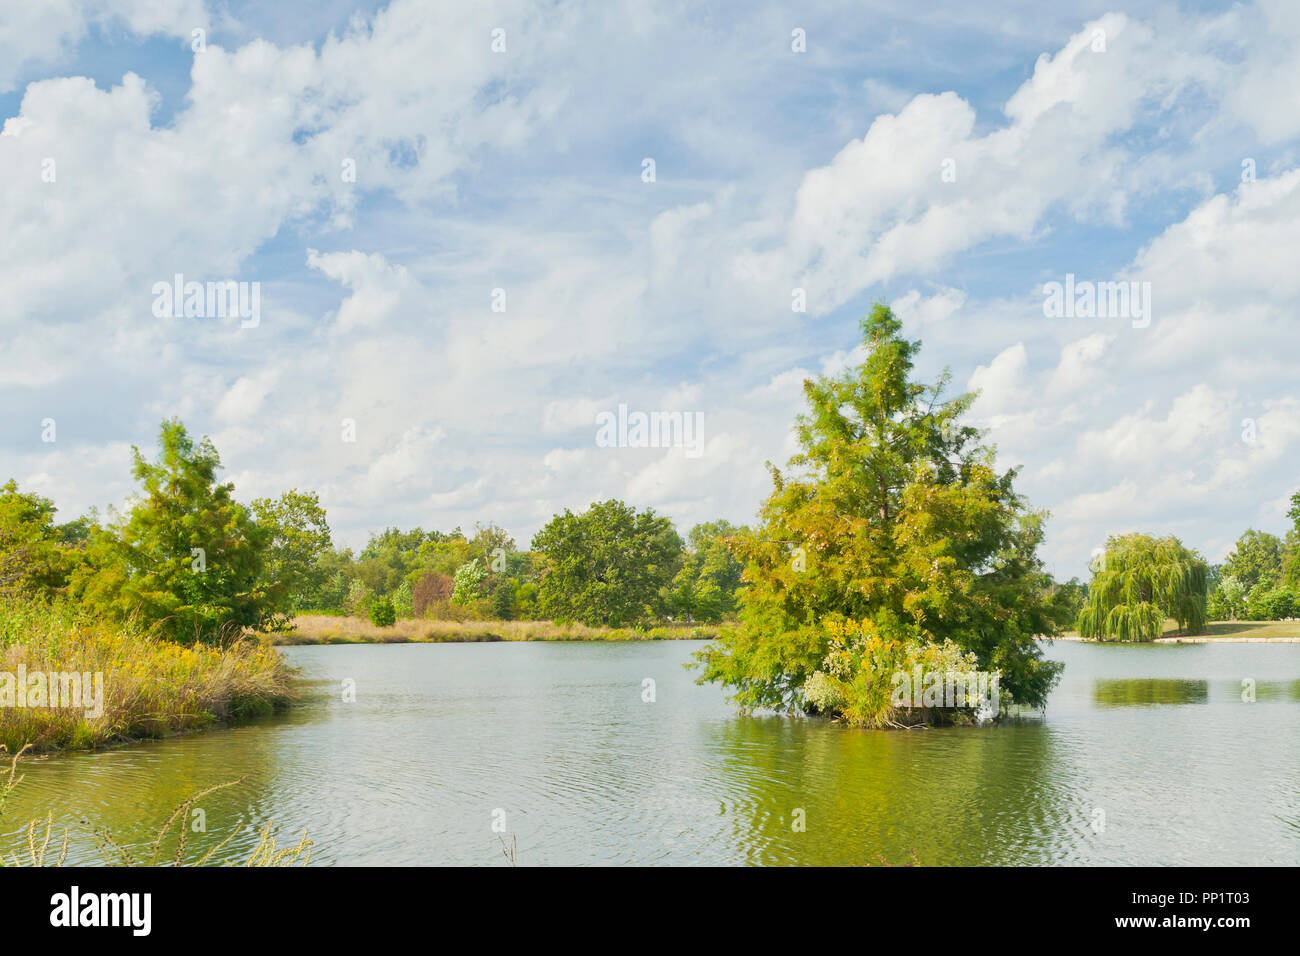 Blue sky with clouds over a bald cypress tree on an islet in the Post-Dispatch Lake with a weeping willow in the distance at St. Louis Forest Park. Stock Photo